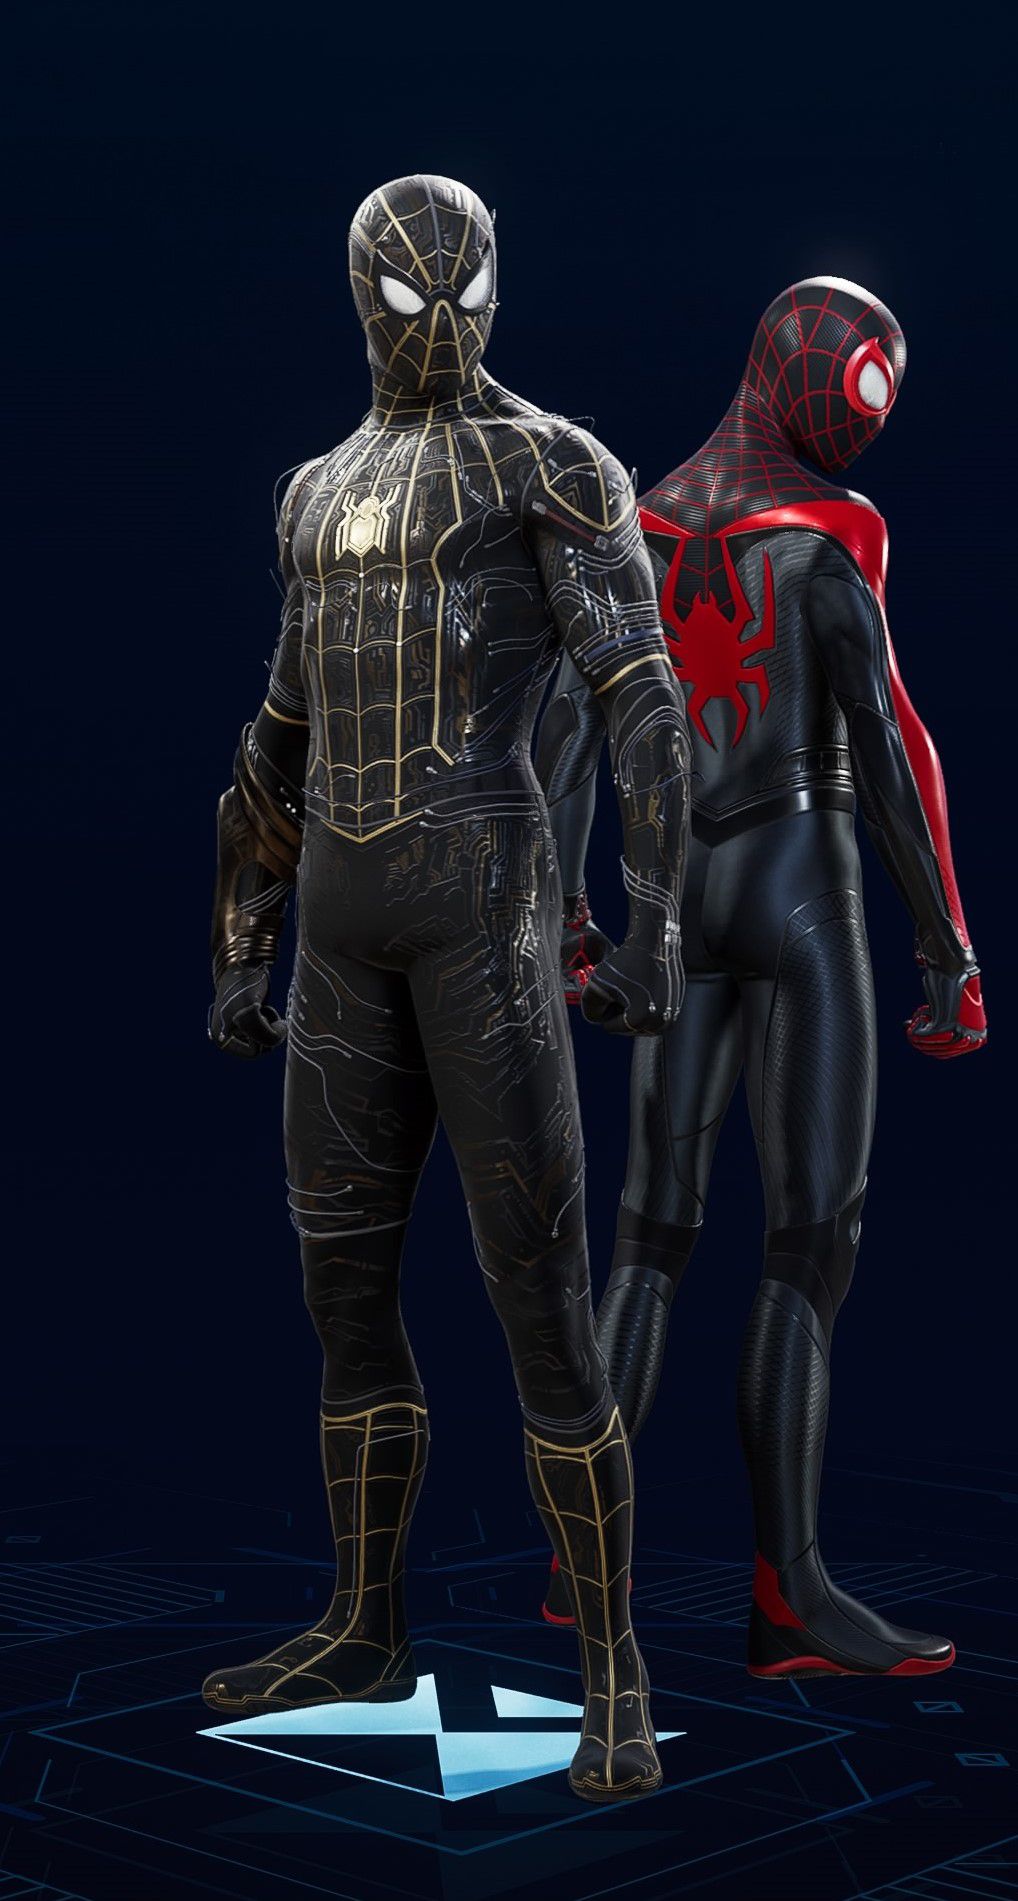 Peter Parker stands in his Black and Gold Suit in the suit selection screen of Spider-Man 2.